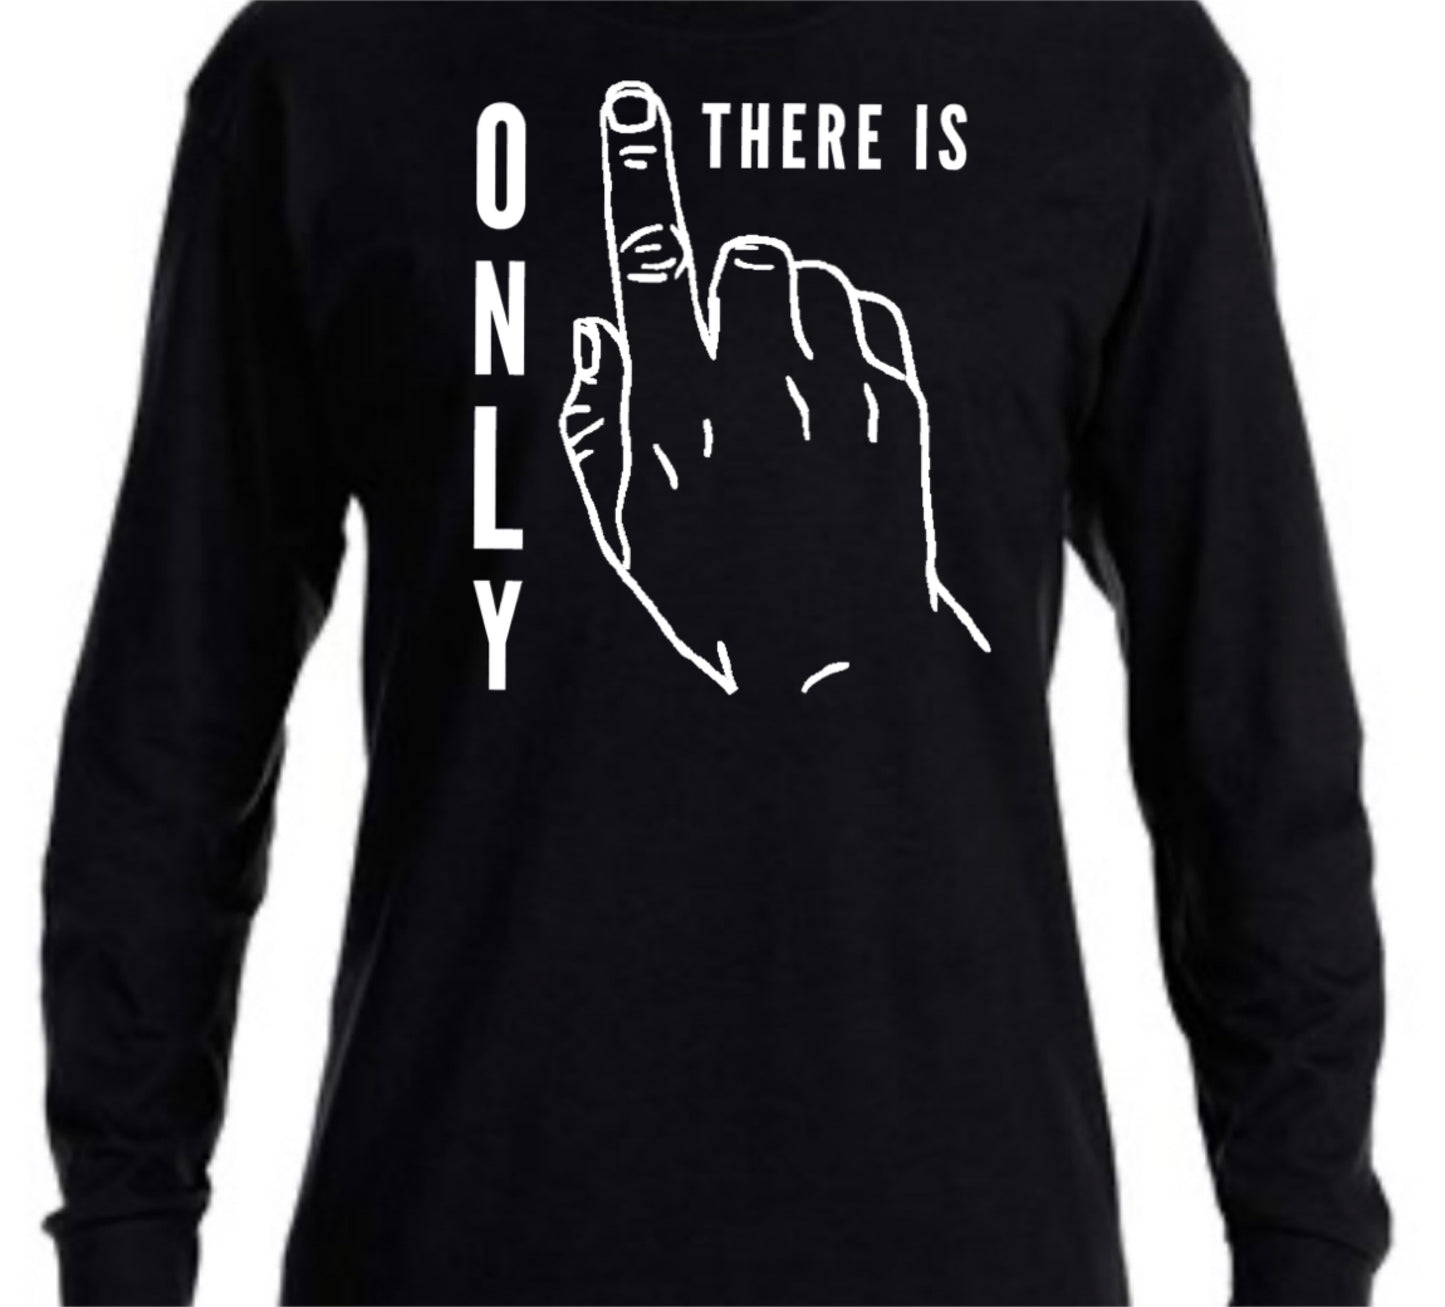 There Is Only One Tshirt - Short Sleeve & Long Sleeve